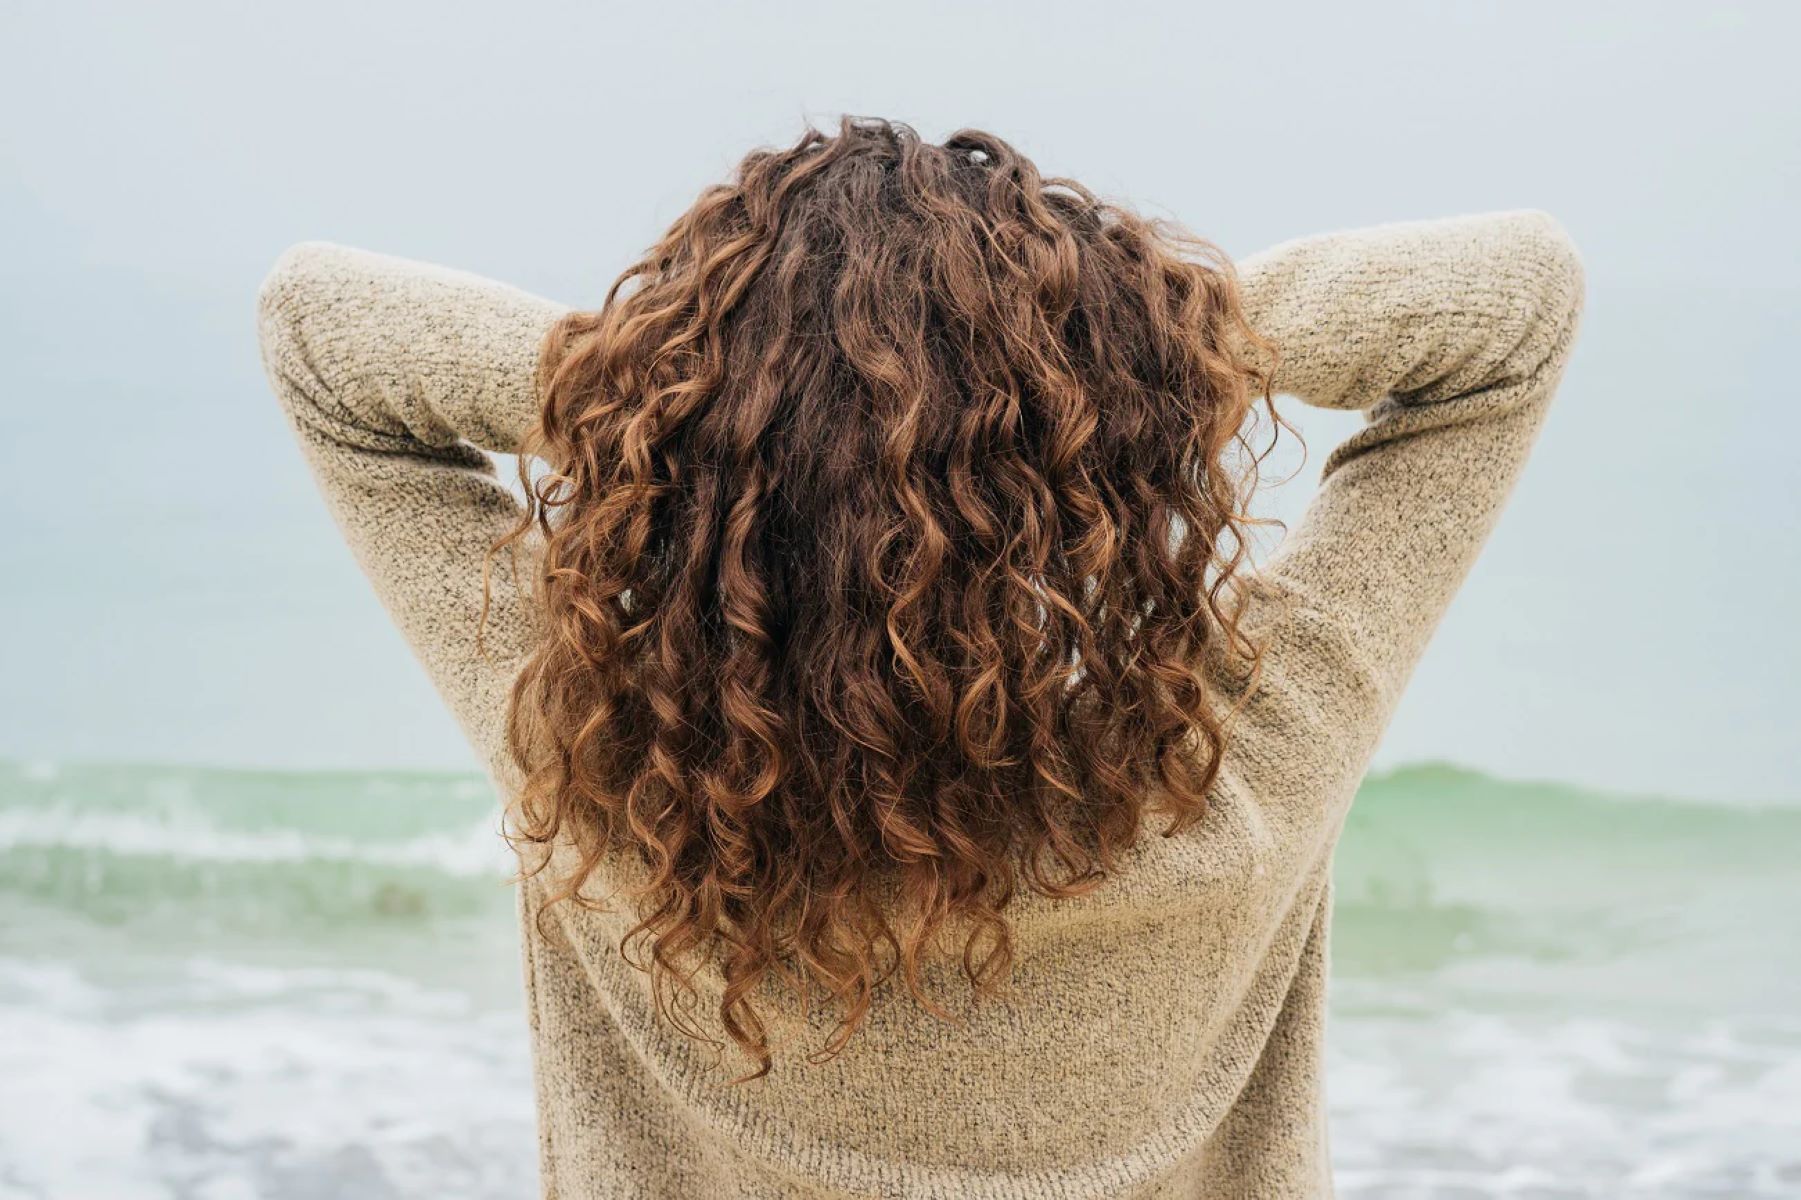 5 Easy Hacks To Tame Frizz And Reduce Puffiness In Long Curly Hair For A Polished Look In Public!